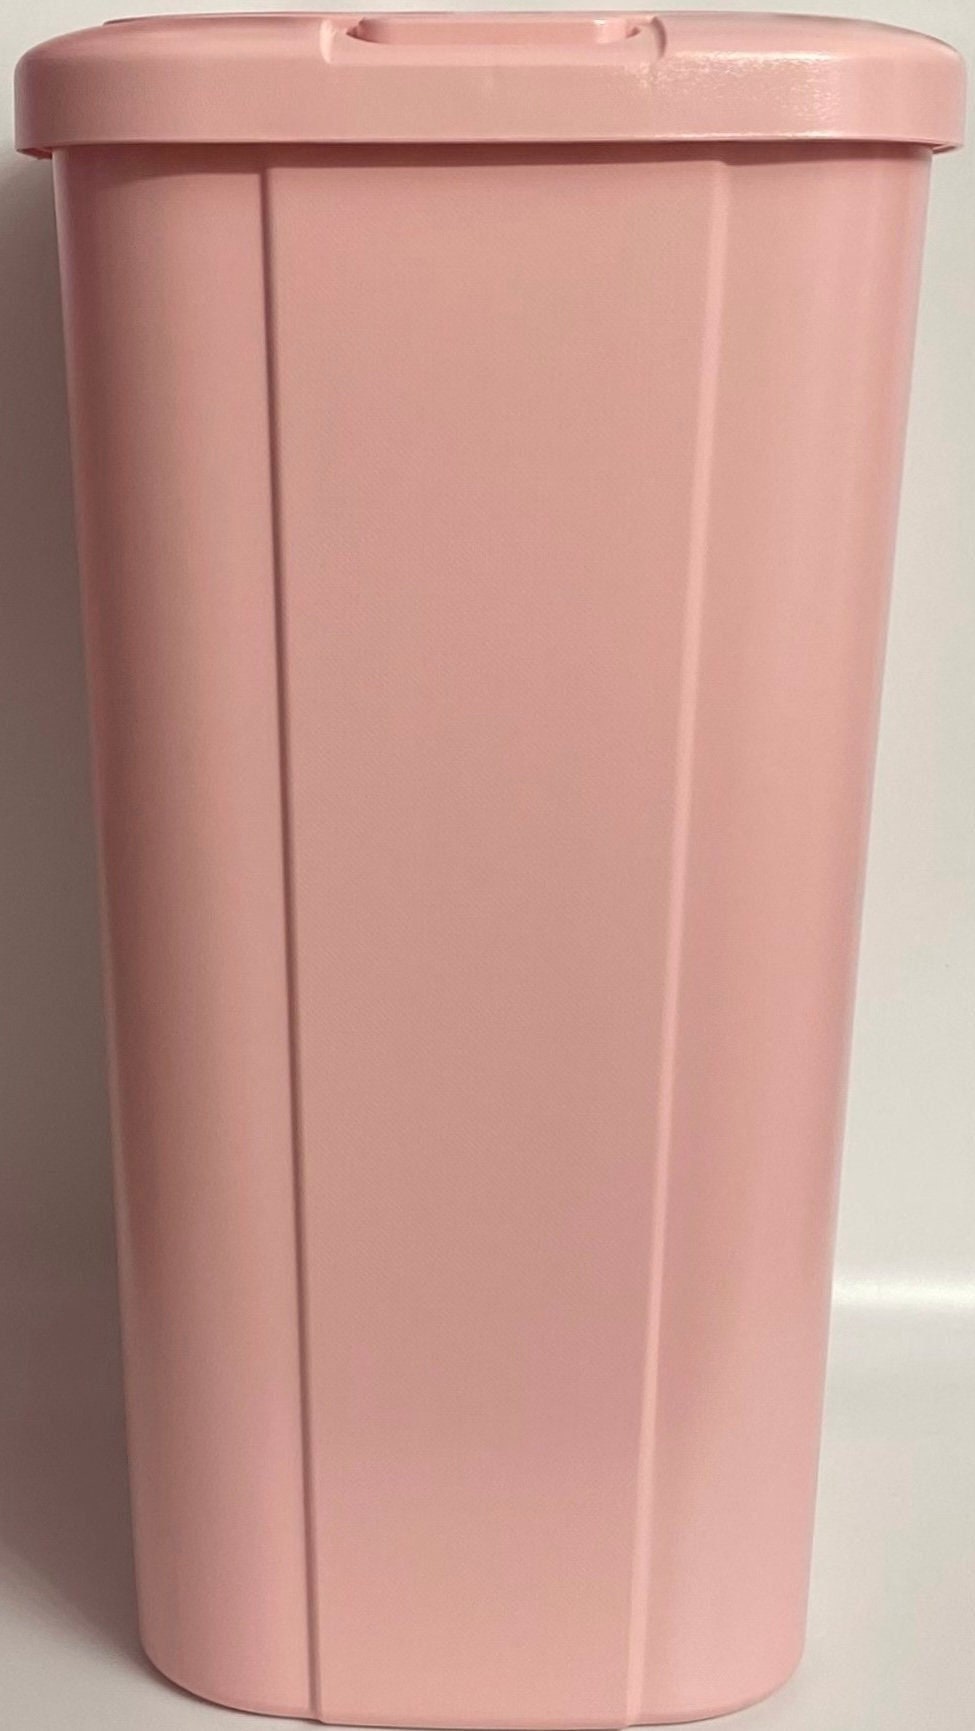 Pink 13.3 Gallon Hefty Trash Can, Pink Trash Can, Pink Garbage Can